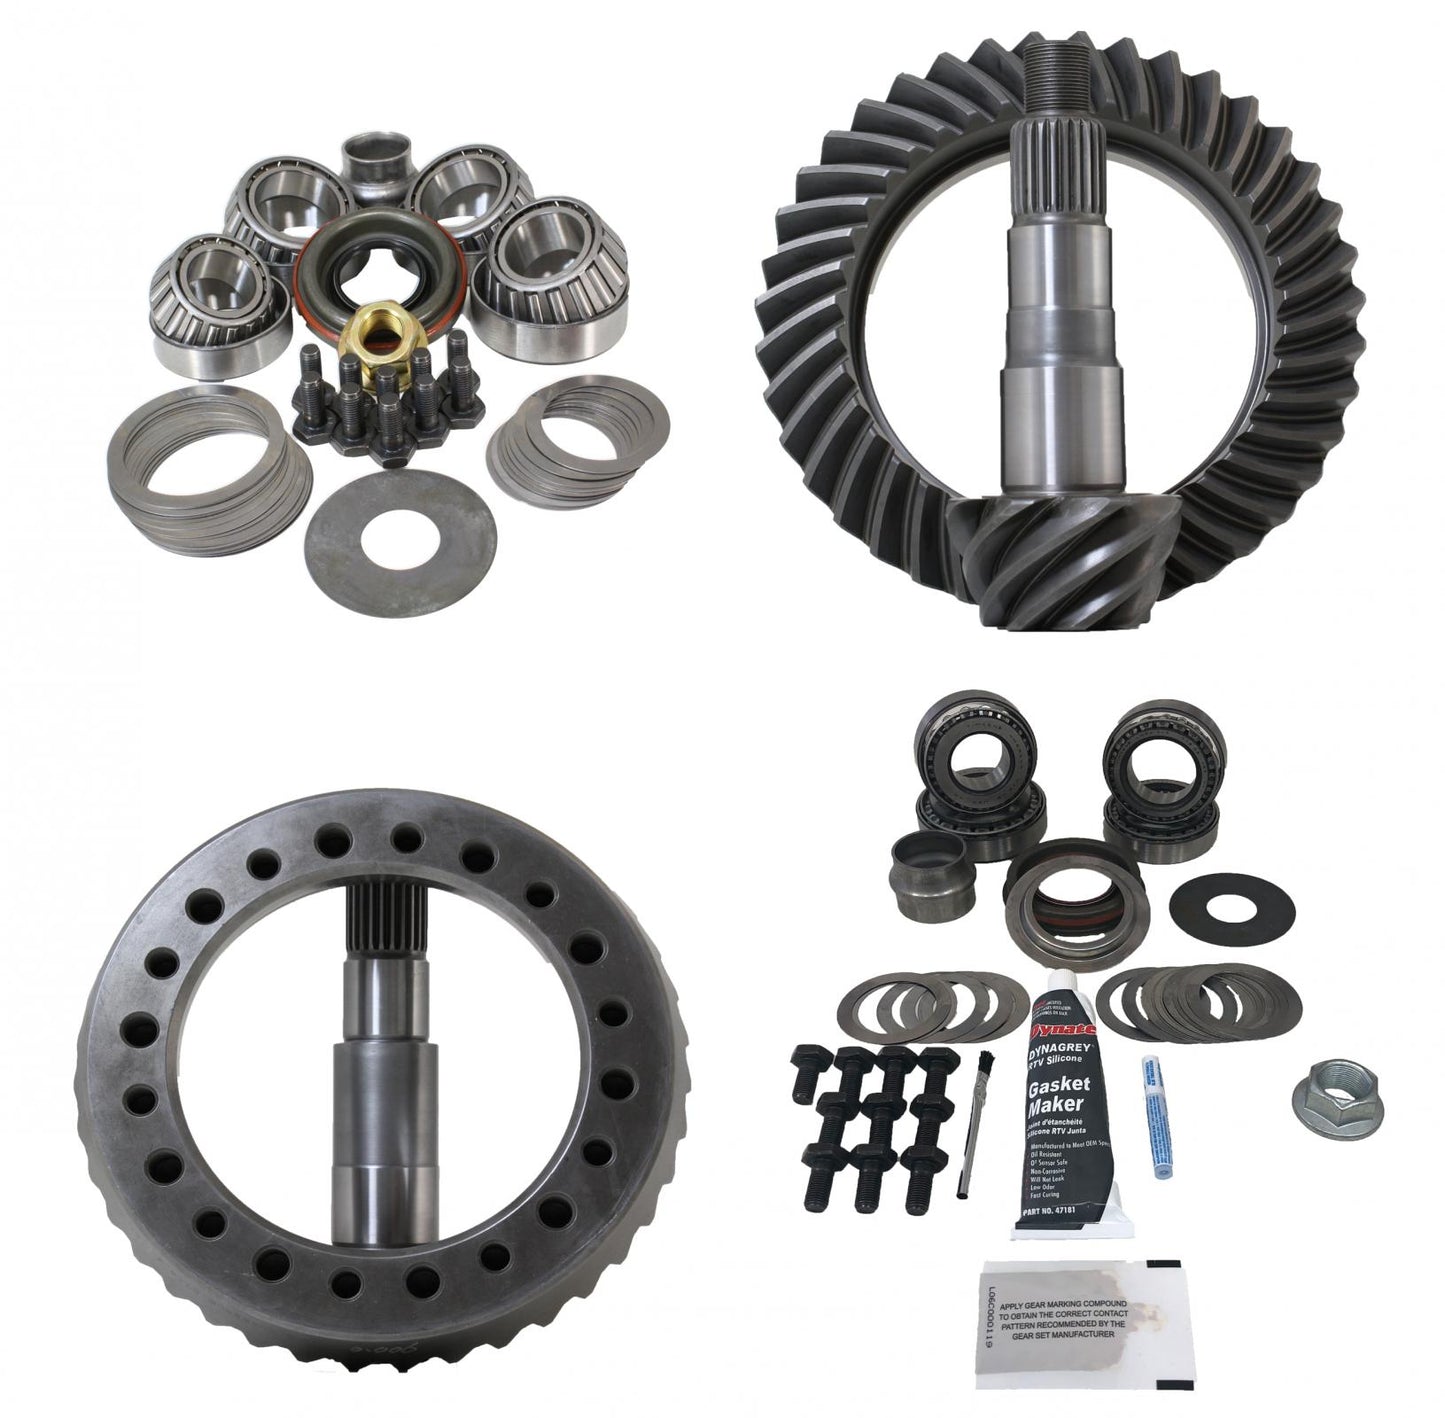 Jeep YJ/XJ 1984-96 4.88 Ratio Gear Package (D35-D30 Reverse) with Timken Bearings Revolution Gear and Axle